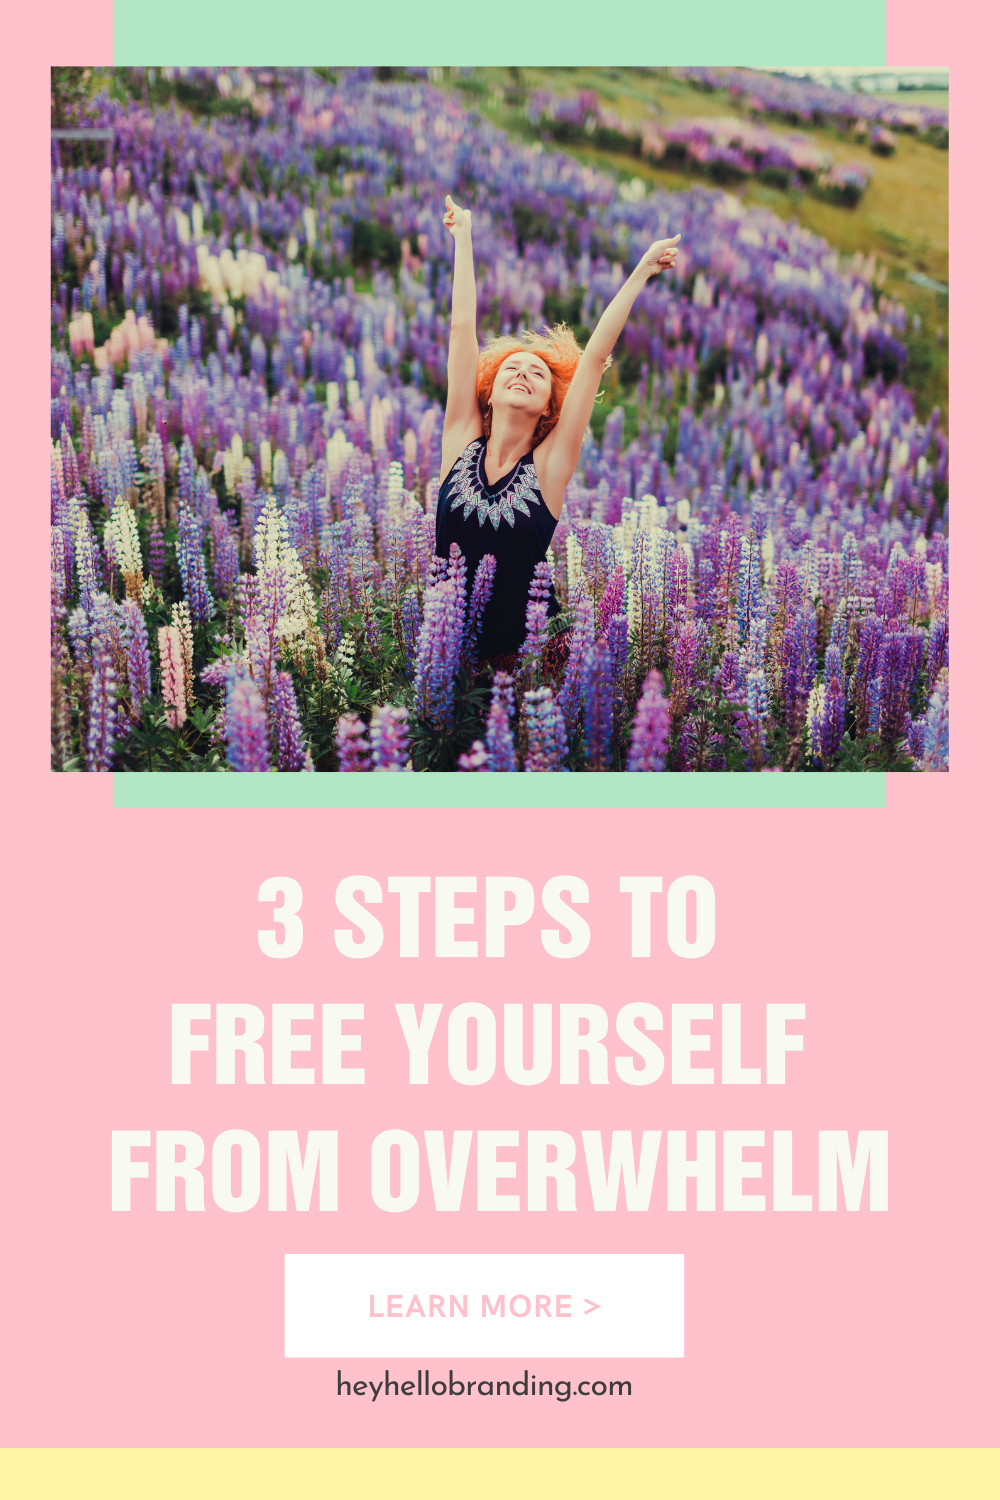 3 Steps to free yourself from overwhelm